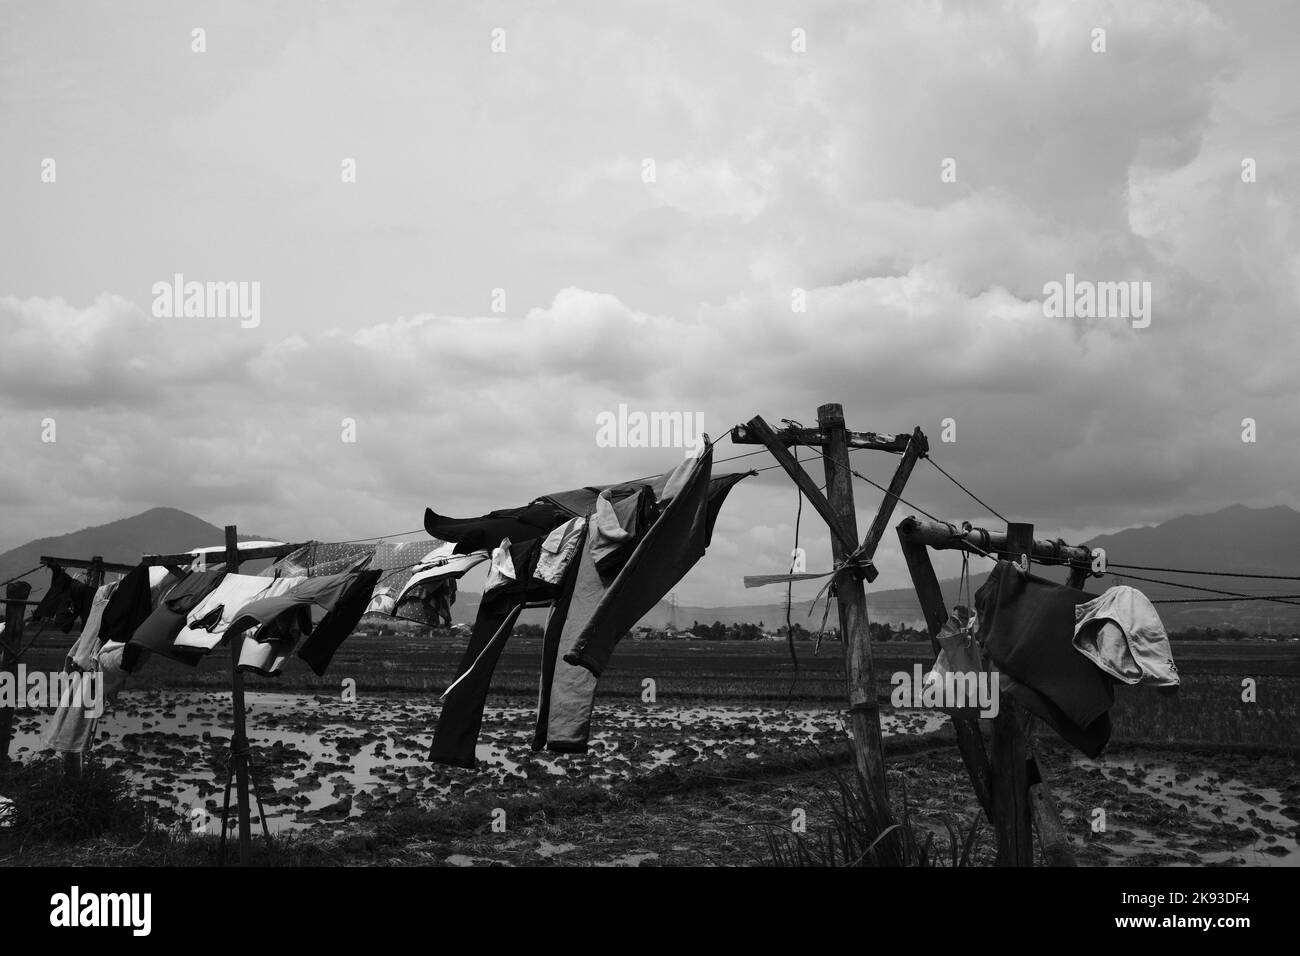 Black and white photo, Monochrome photo of clothes drying in the sun in the Cikancung area - Indonesia Stock Photo